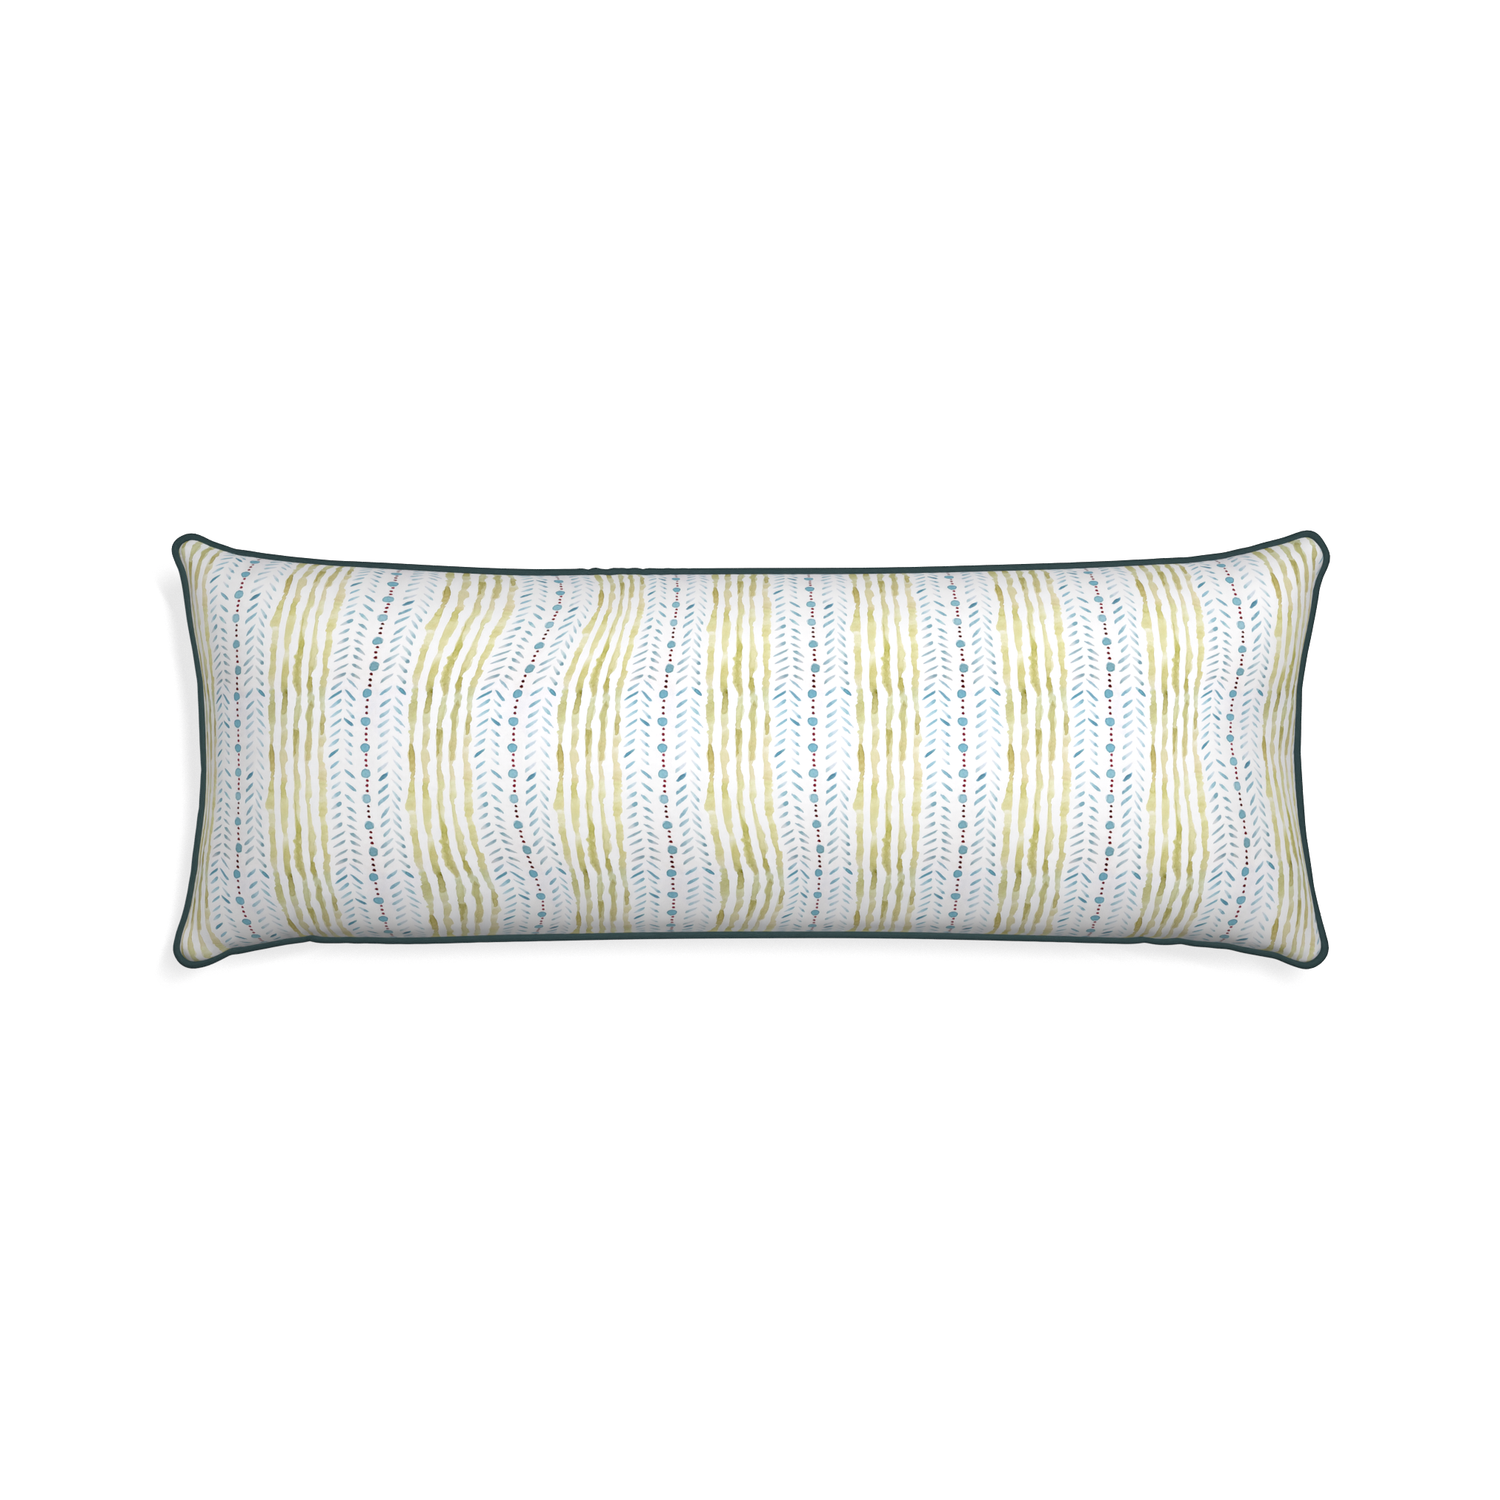 Xl-lumbar julia custom blue & green stripedpillow with p piping on white background